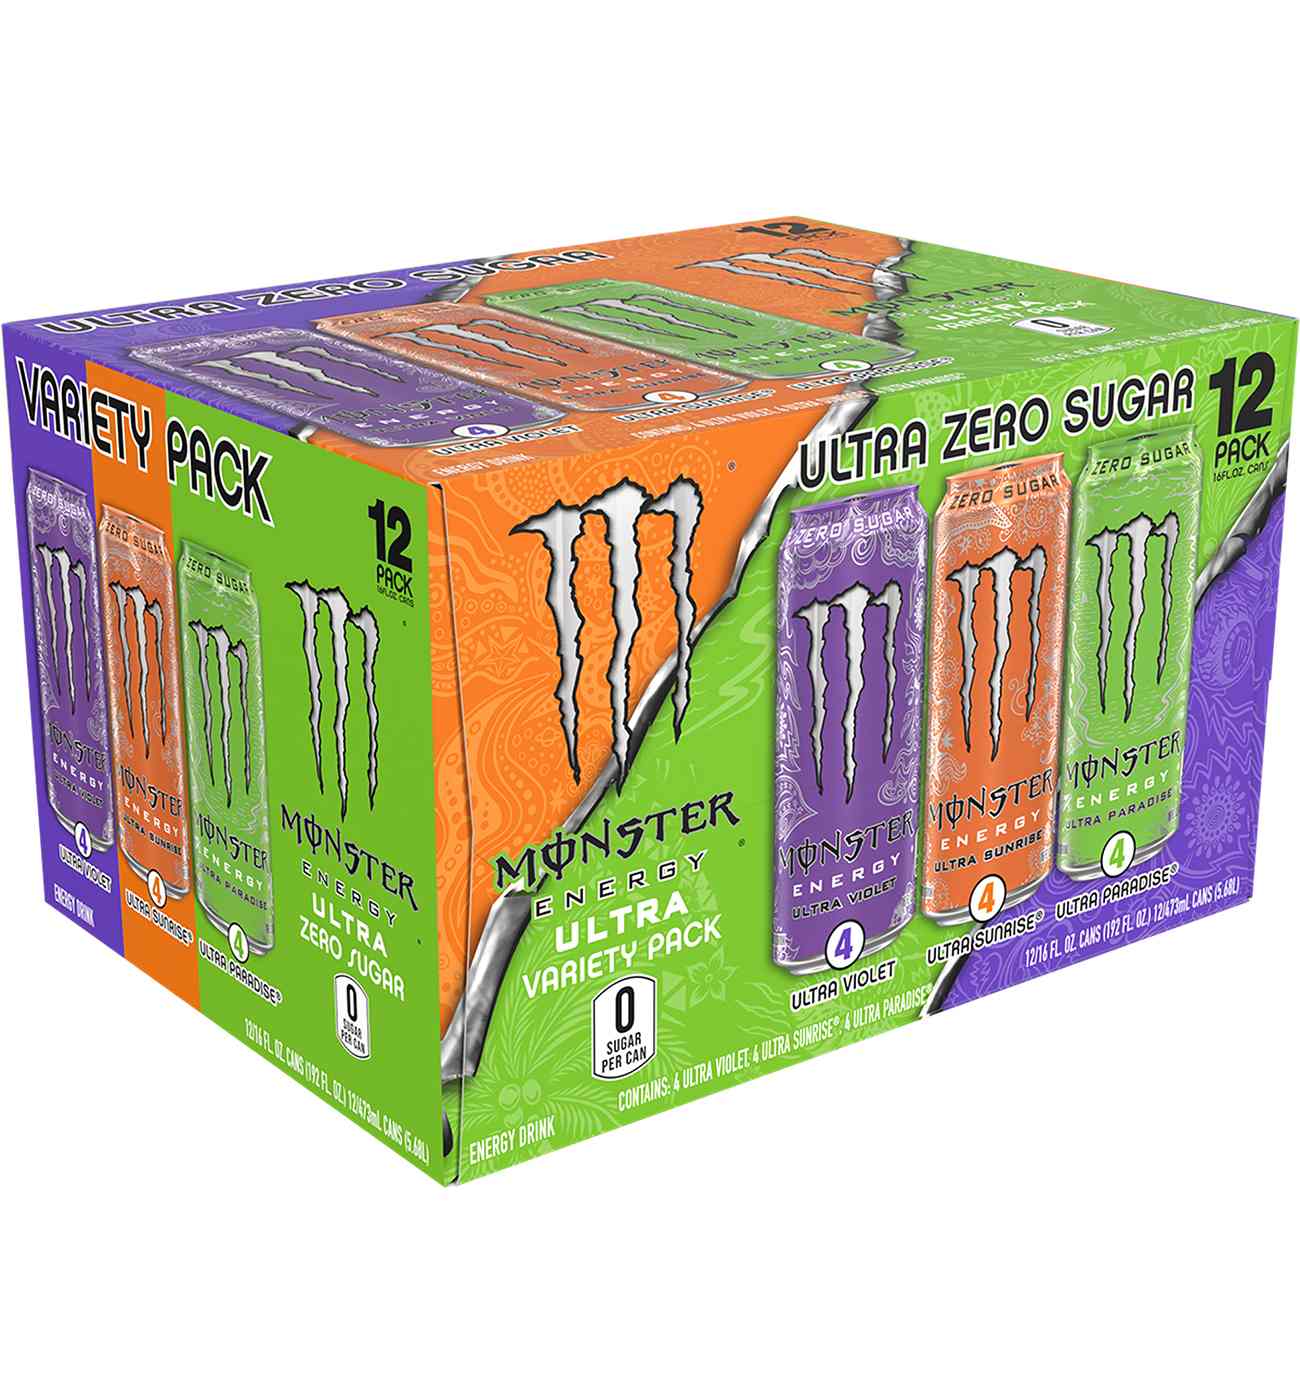 Monster Energy Ultra Zero Sugar Energy Drink Variety 12 pk Cans; image 2 of 2